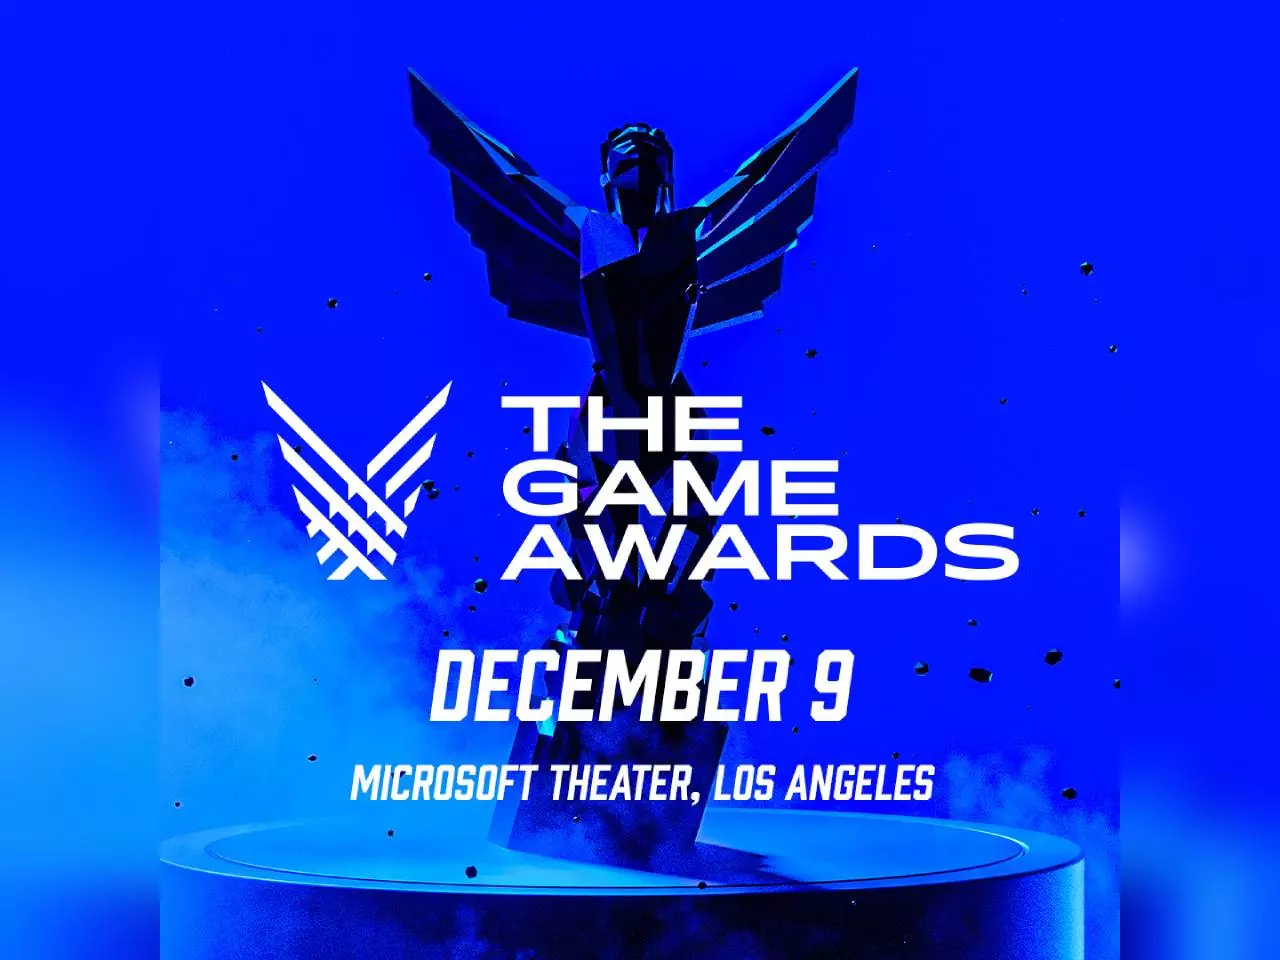 No NFT In Upcoming Game Awards, Soon NFT Game Awards?